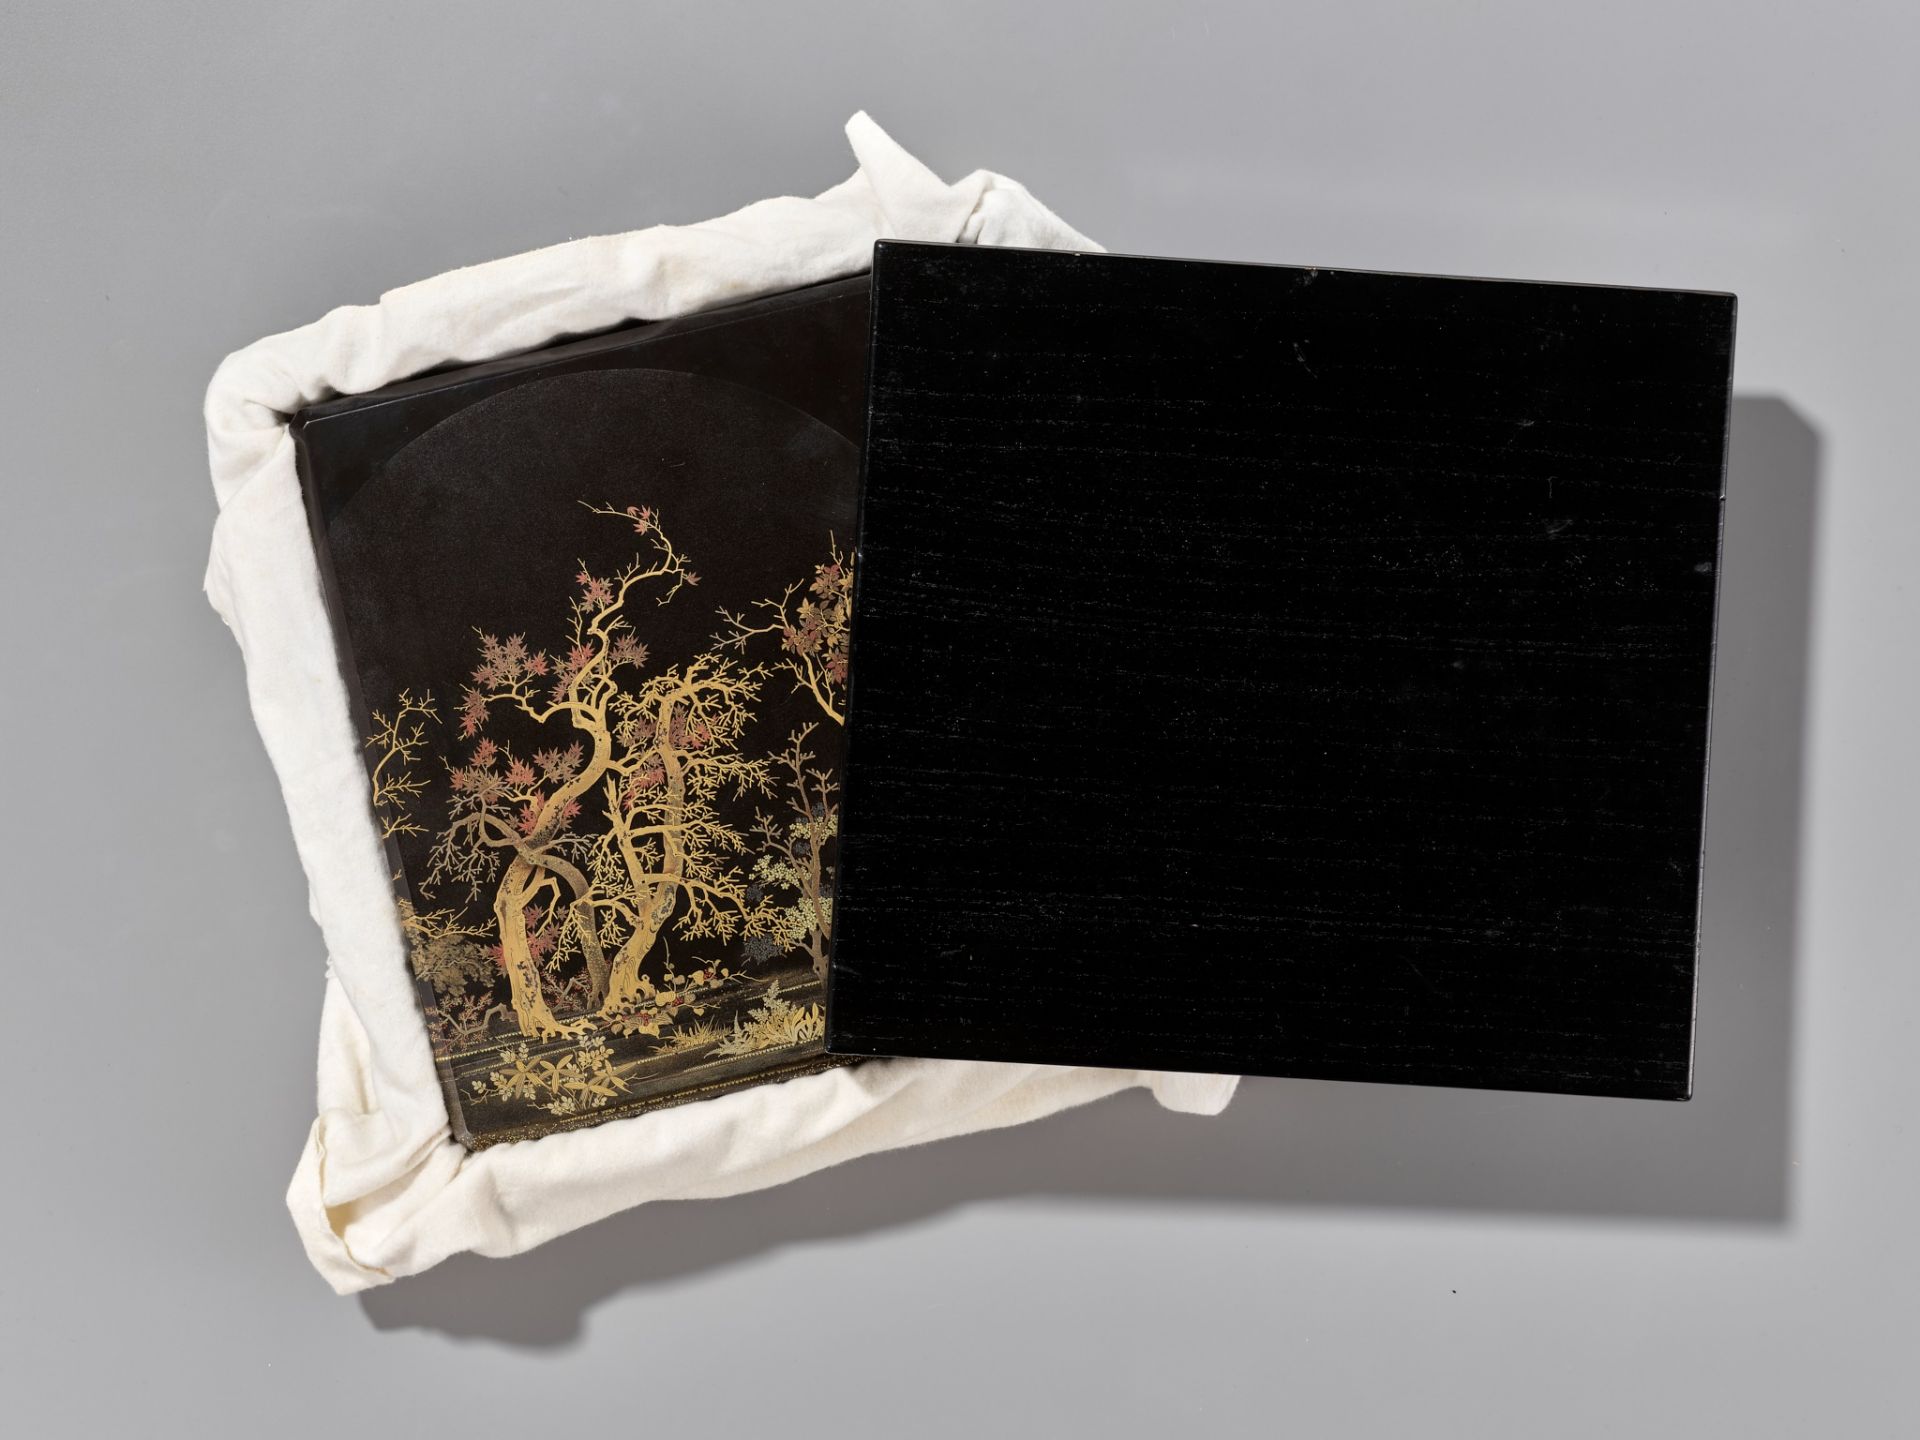 A SUPERB LACQUER SUZURIBAKO (WRITING BOX) DEPICTING A MOONLIT FOREST - Image 14 of 15